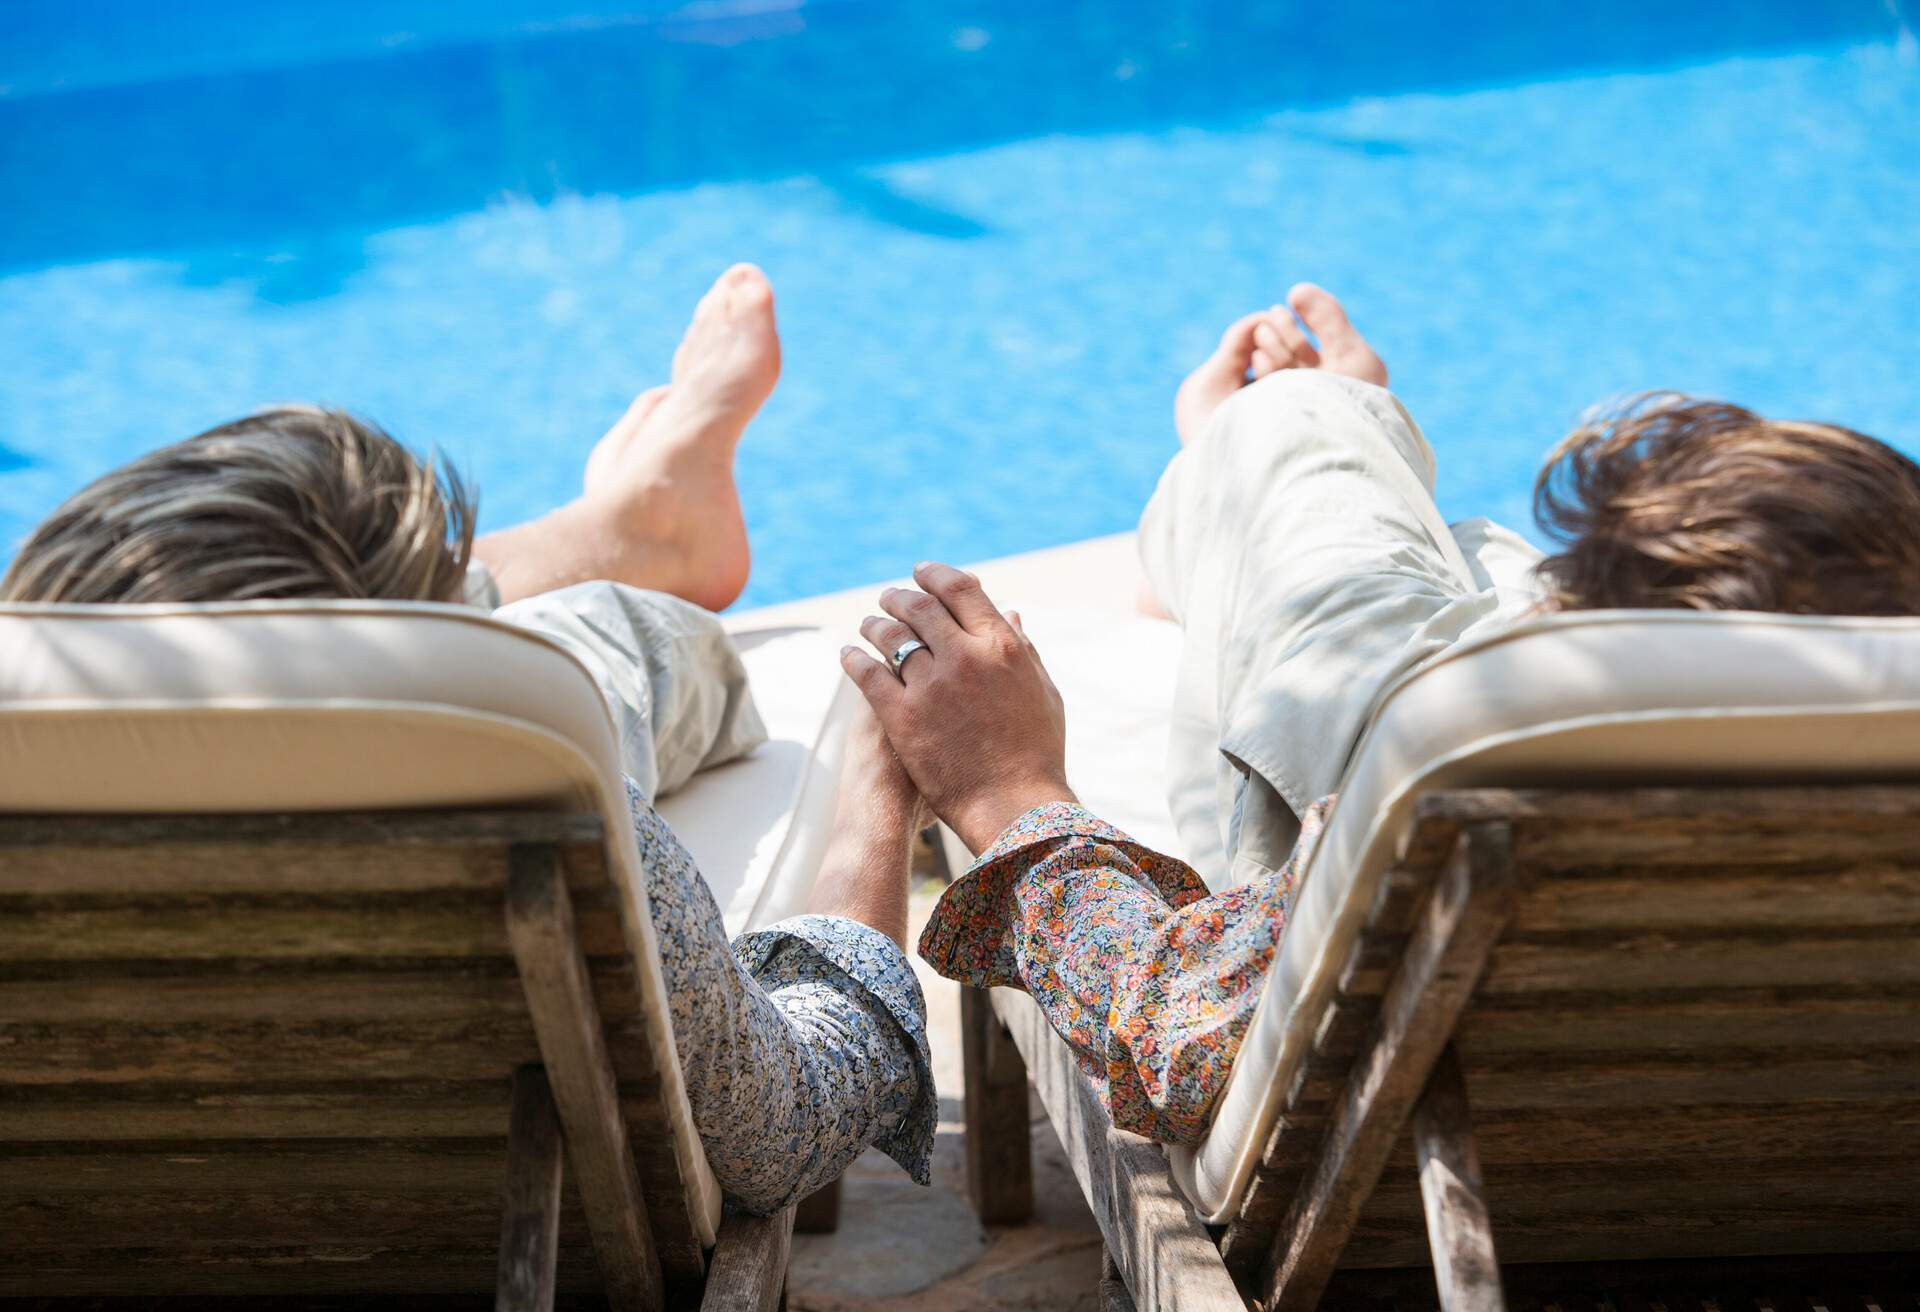 PEOPLE_LGBTQ_MALE_GAY_COUPLE_HOLDING_HANDS_POOL